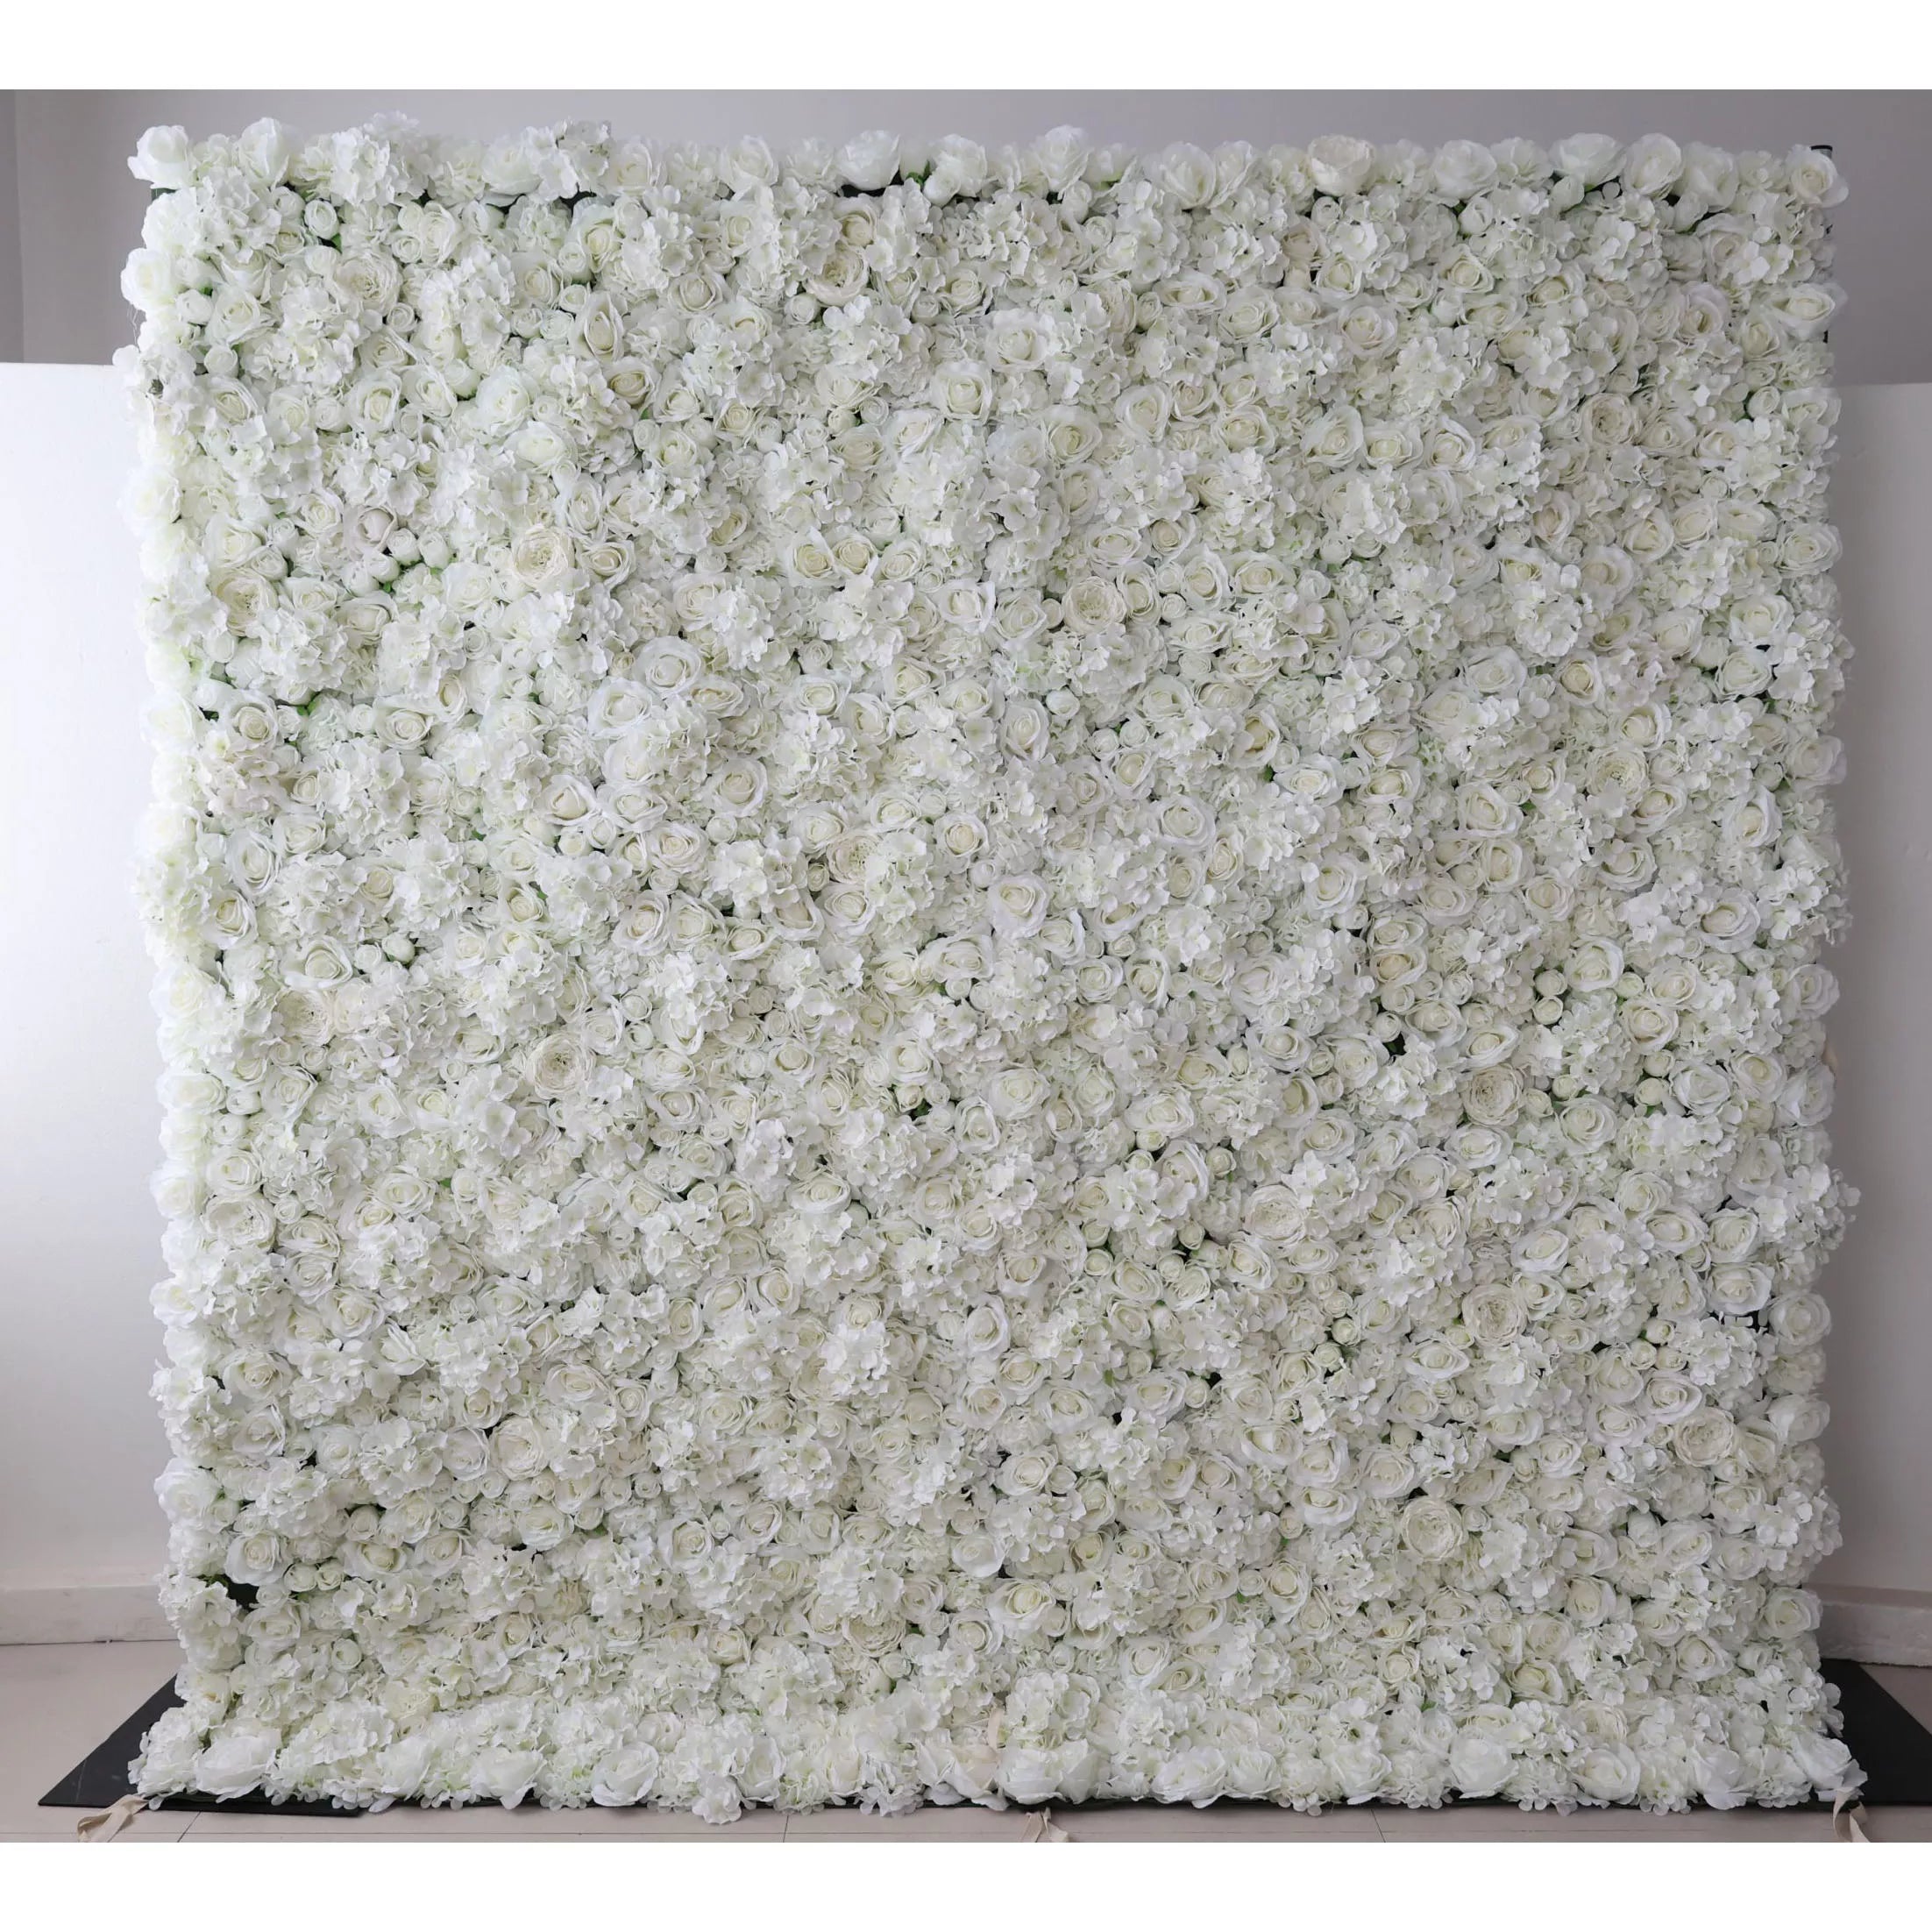 Valar Flowers Roll Up Fabric Artificial Pure White Flower Wall Wedding Backdrop, Floral Party Decor, Event Photography-VF-051-2